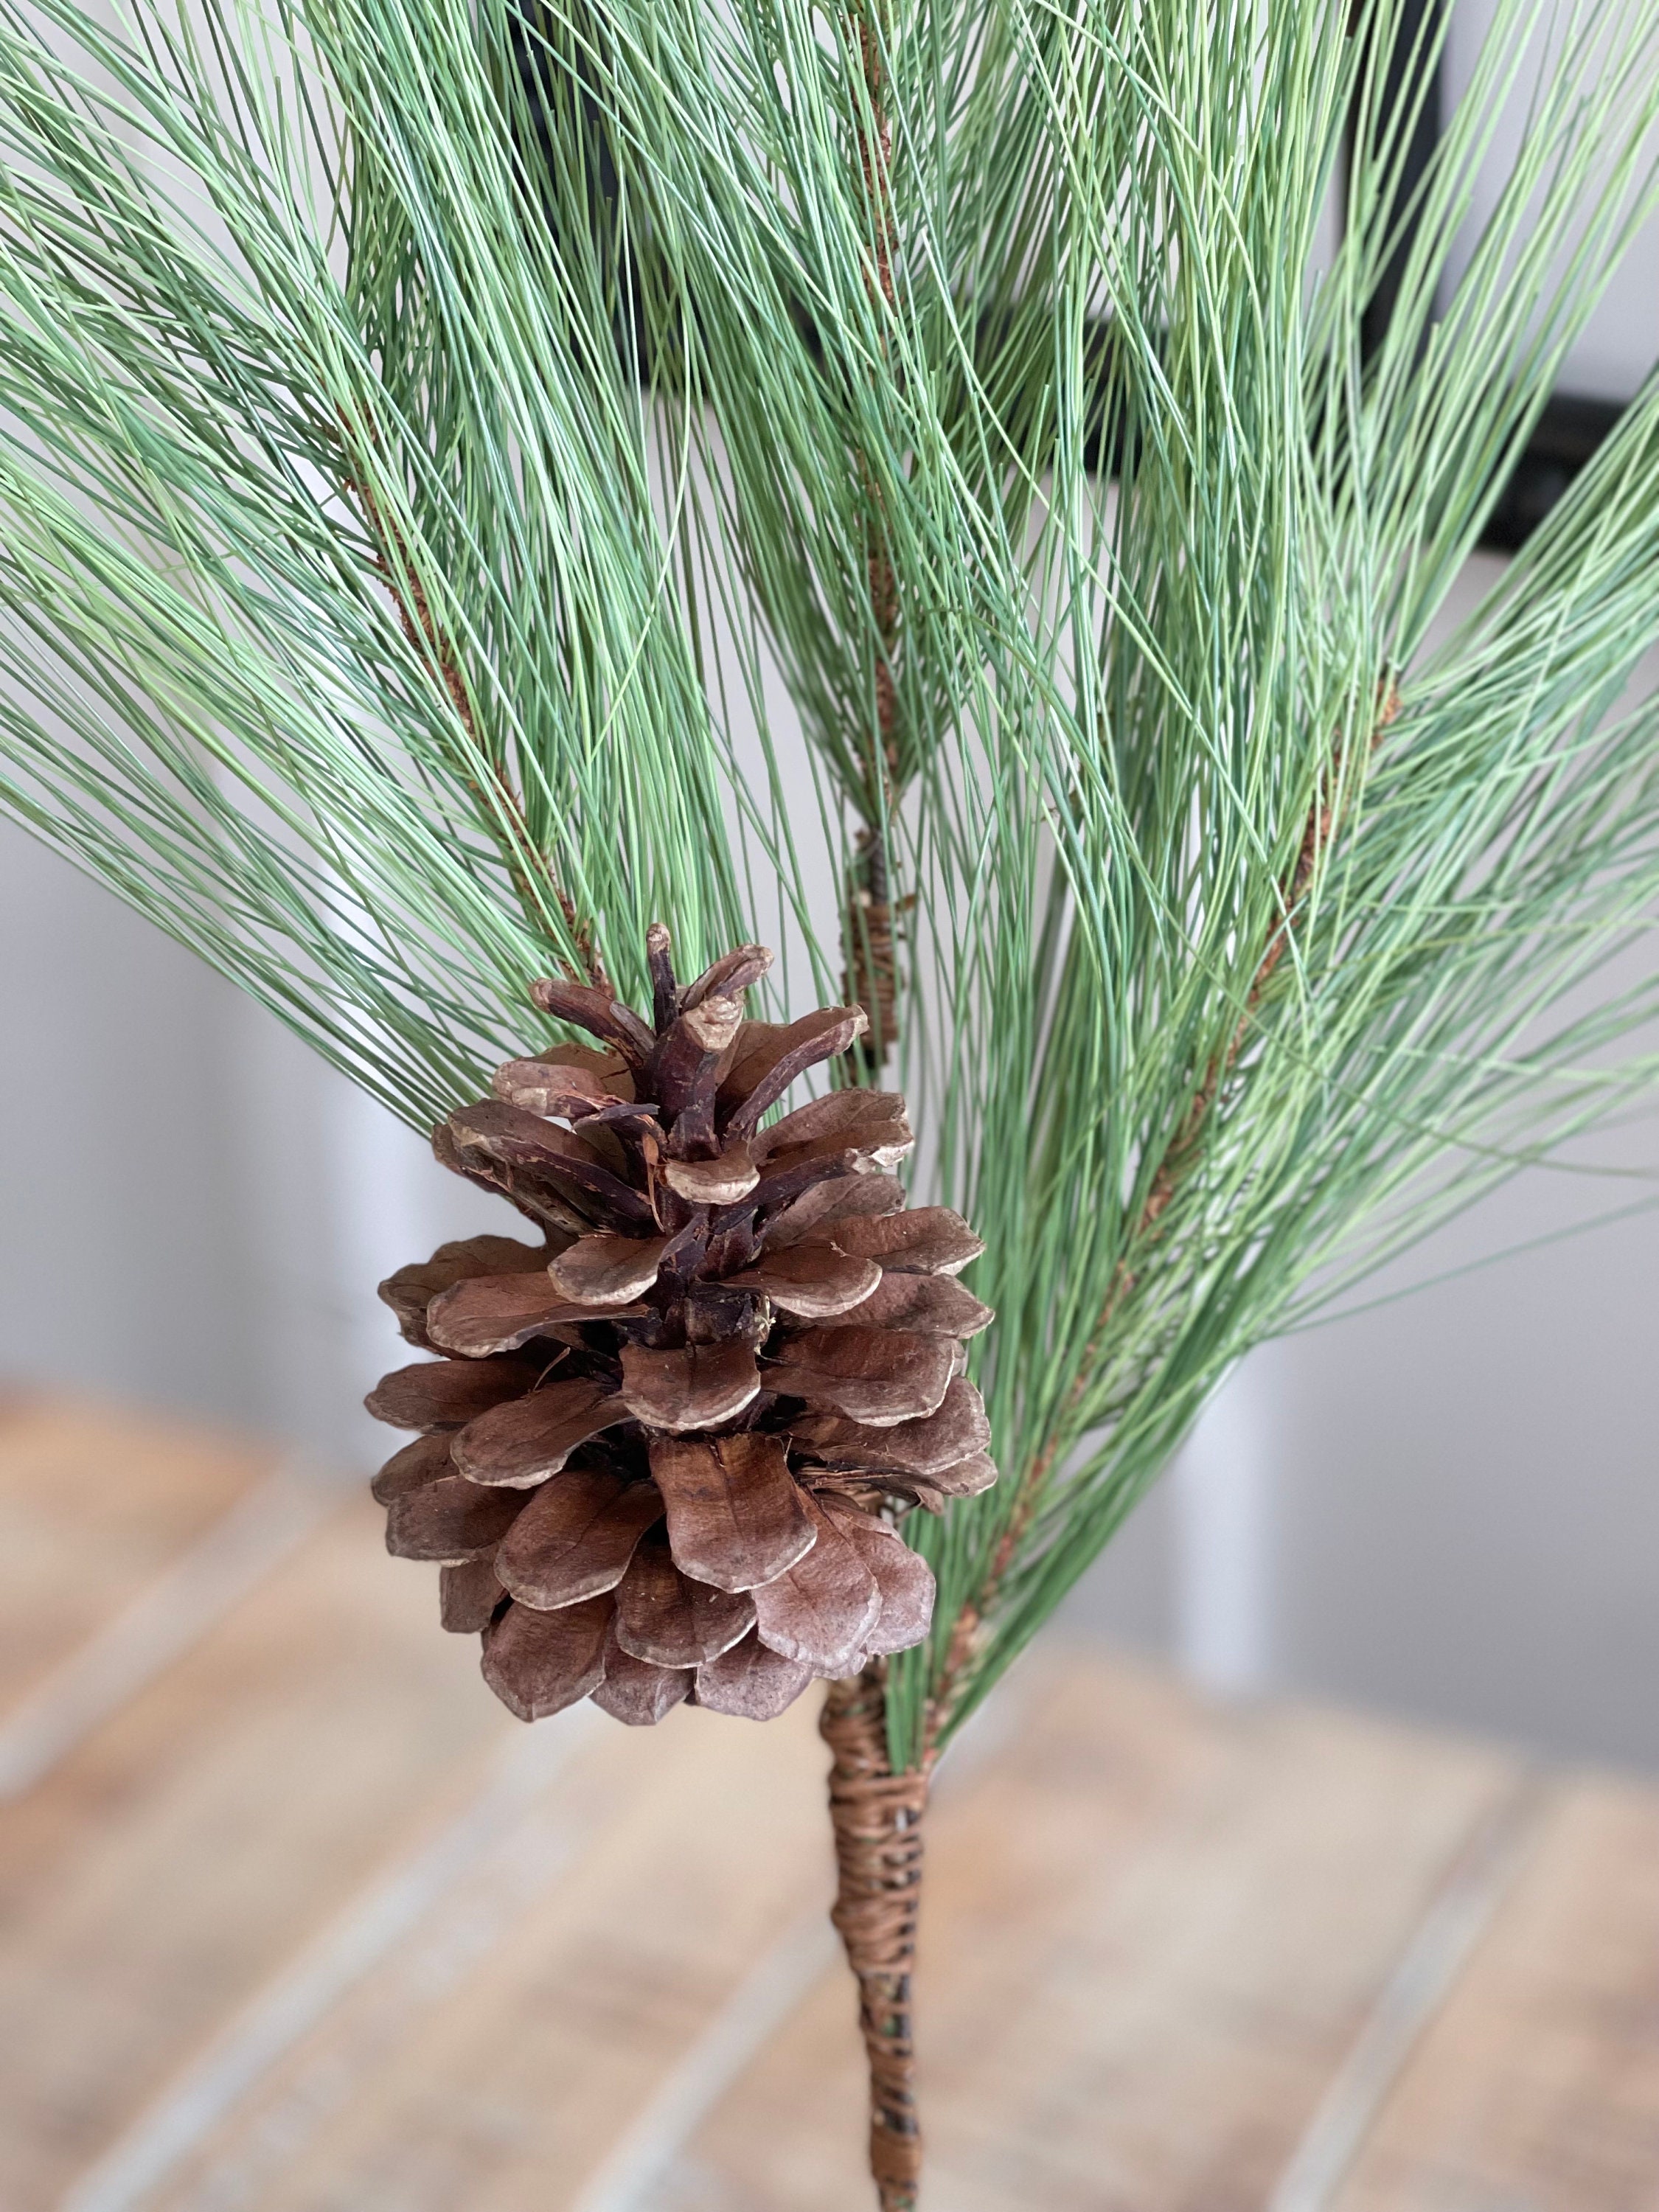 12 Long Needle Pine Half Sphere With Cones! Perfect For Christmas